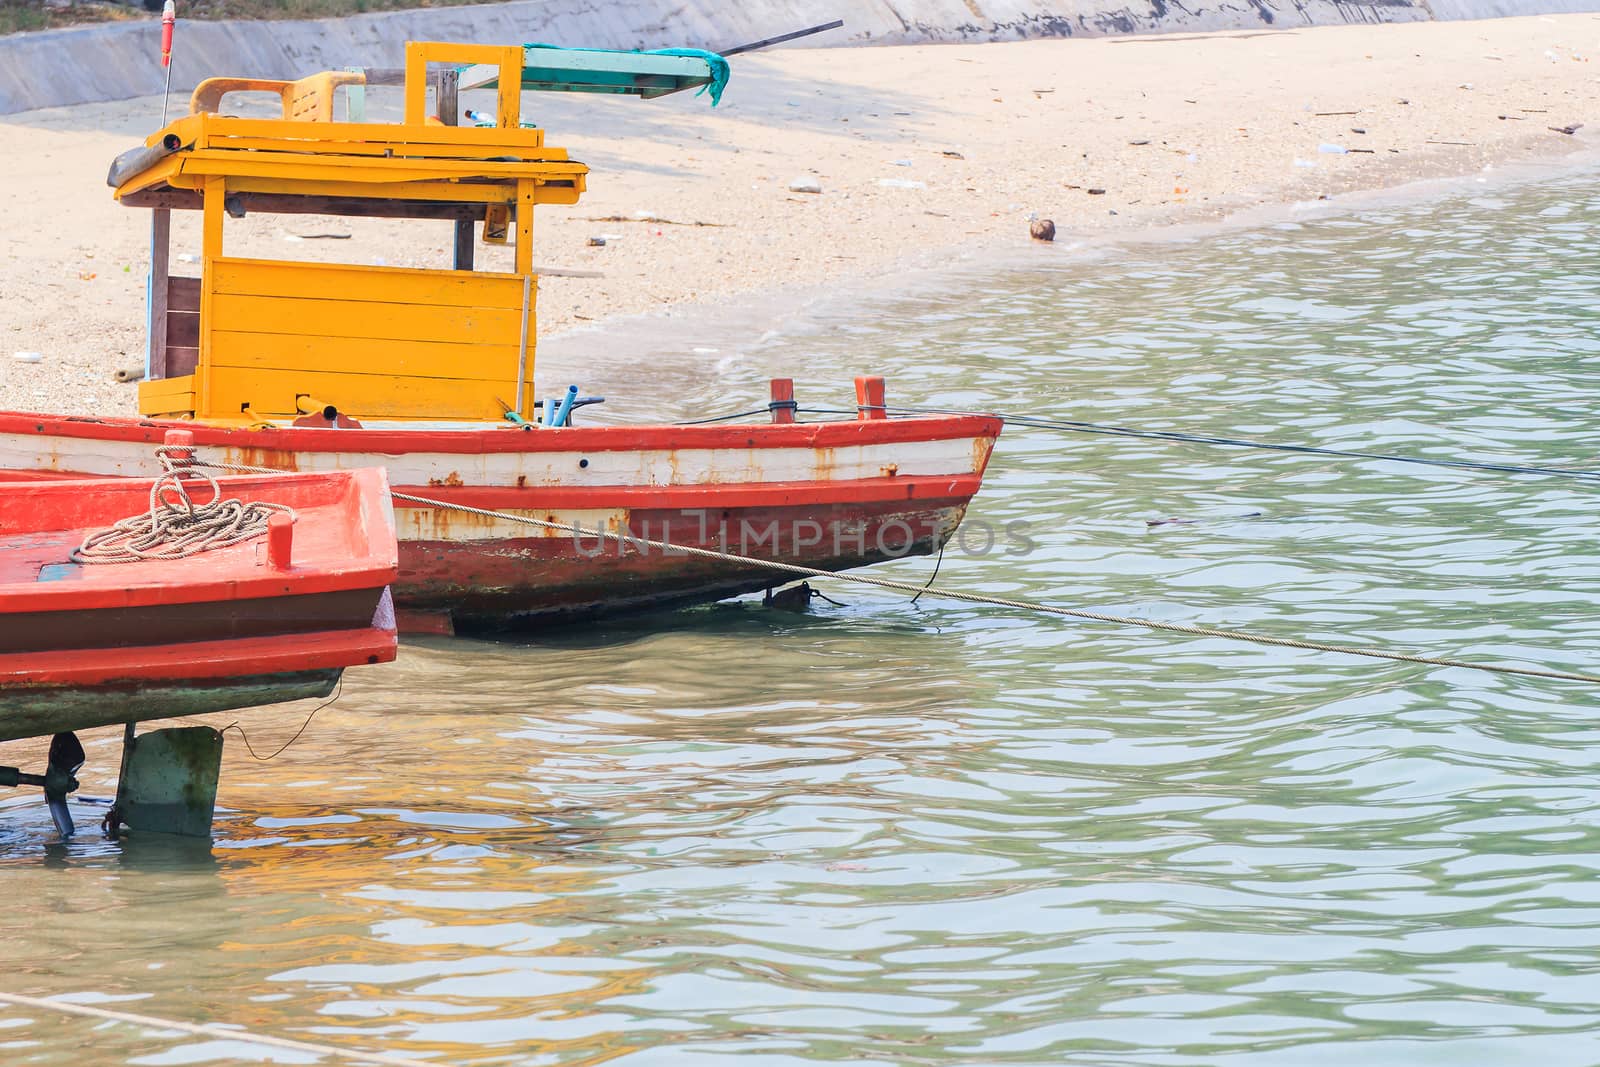 Thai fishing boat used as a vehicle for finding fish in the sea.